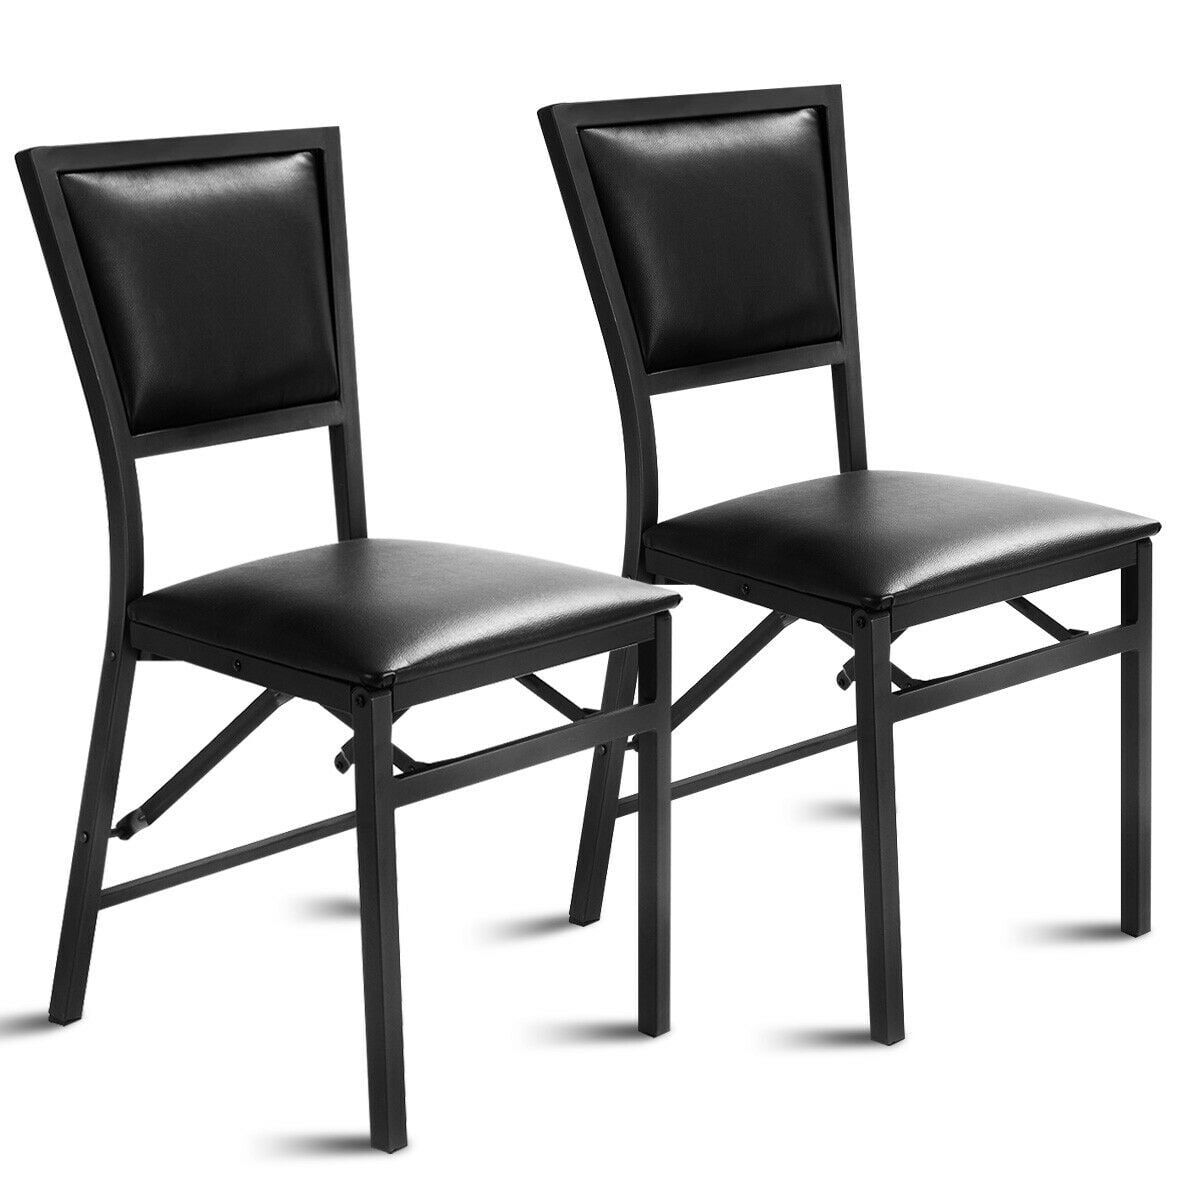 Costway Set of 2 metal Folding Chair Dining Chairs Home ...